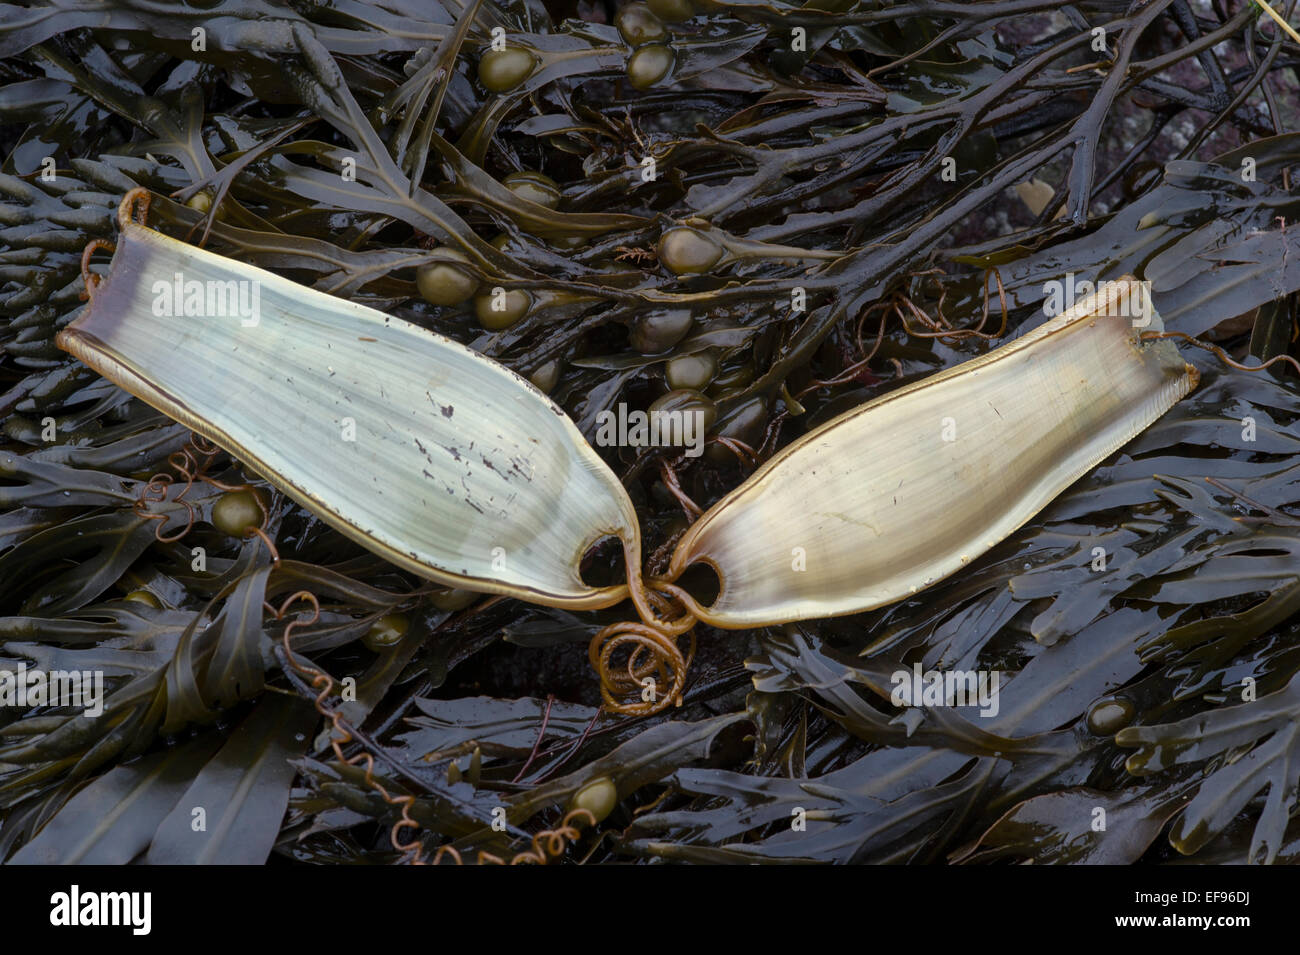 Mermaid's Purse - Egg case of the Lesser - Spotted Dogfish - Scyliorhinus canicula on seaweed Stock Photo